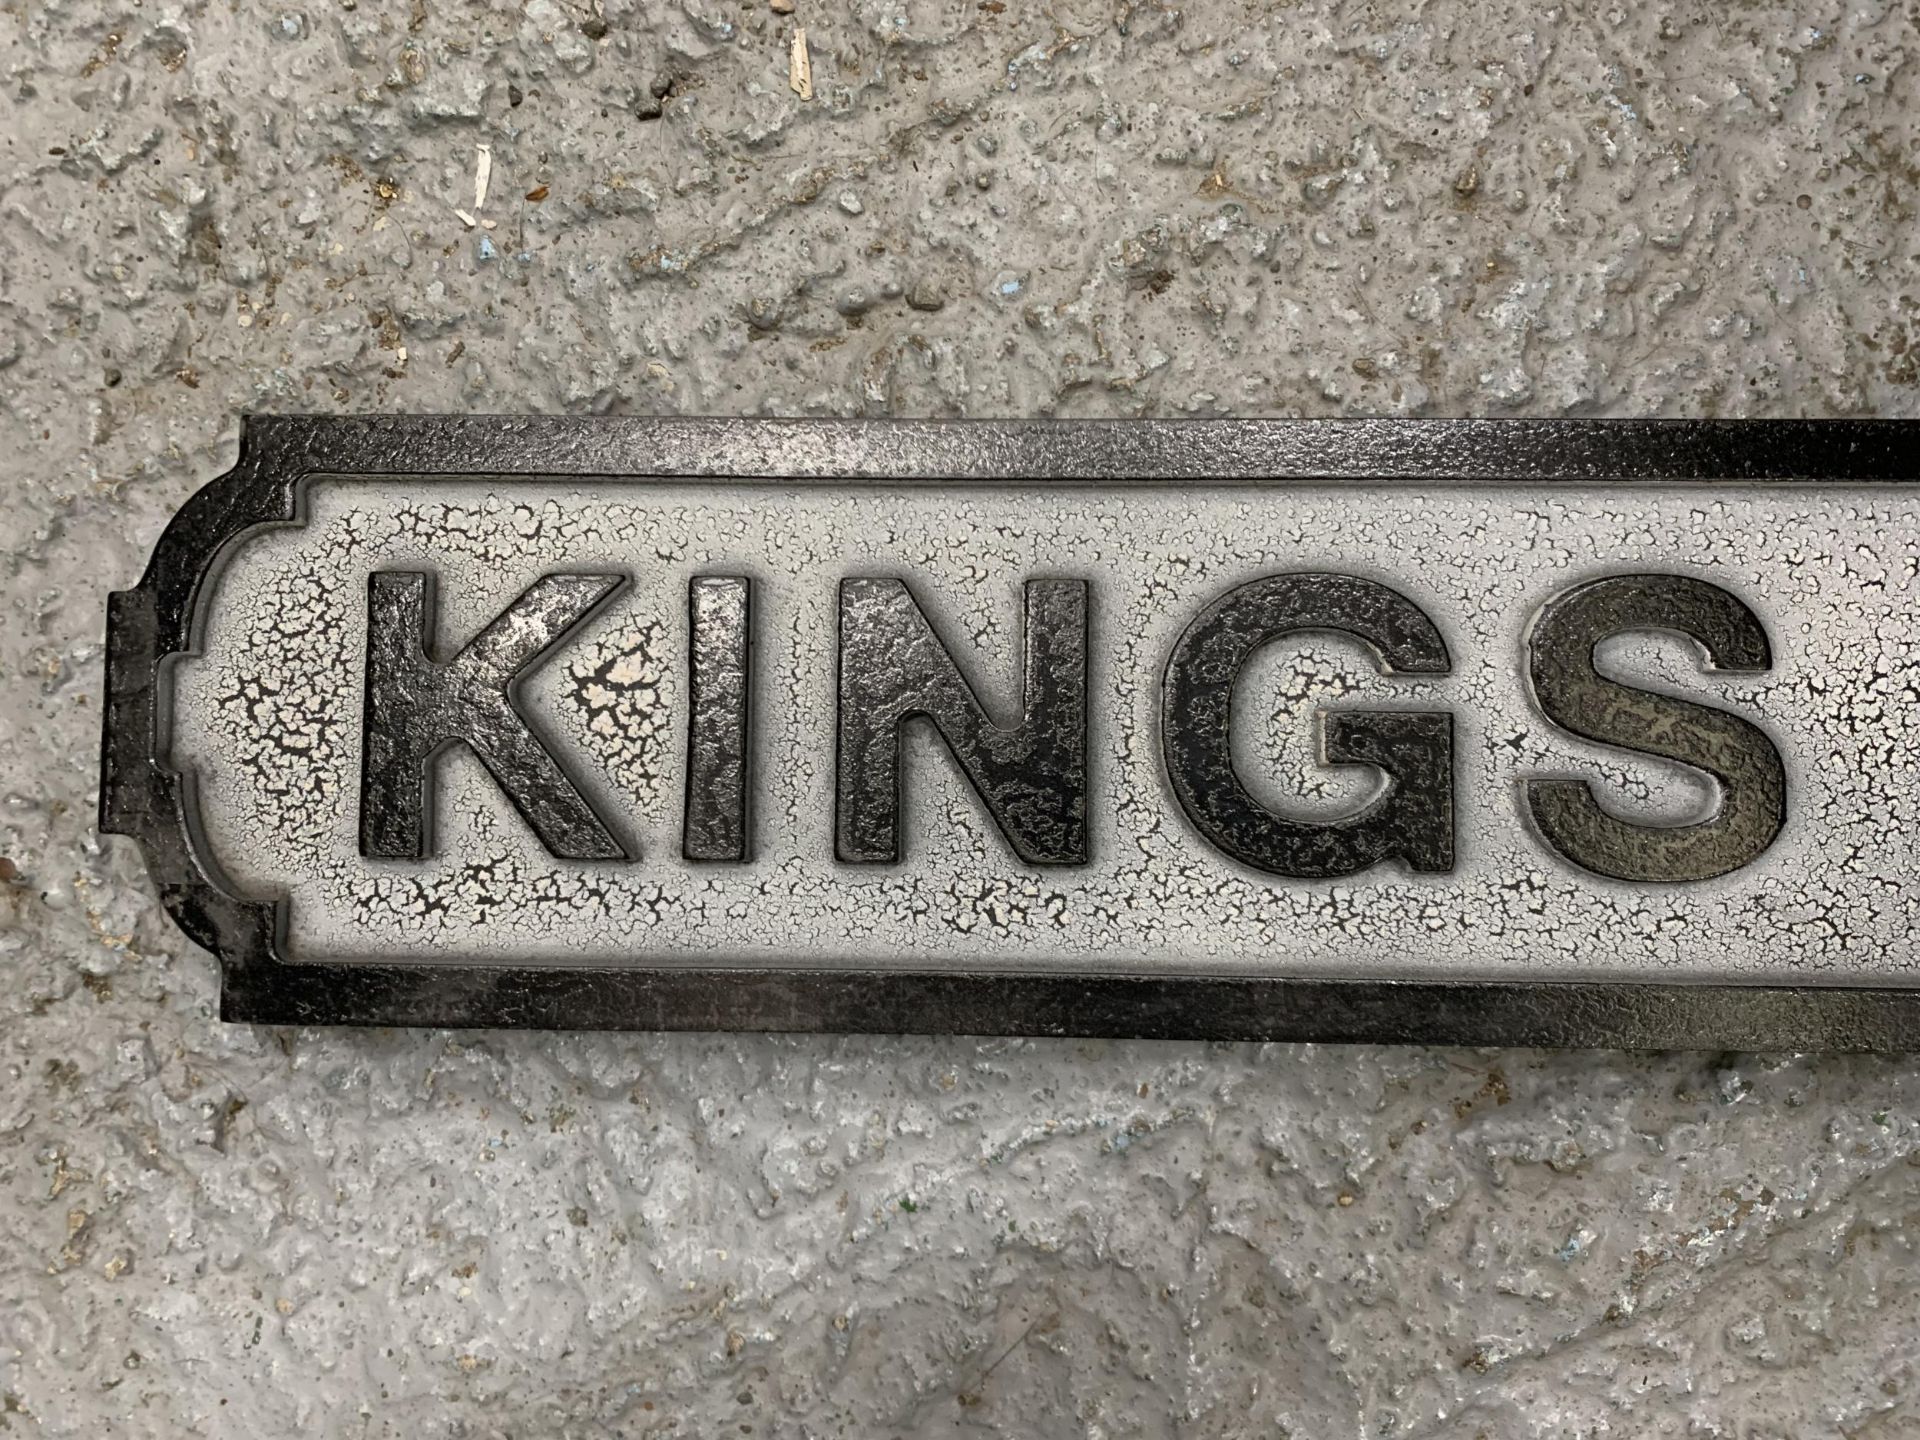 A WOODEN KINGS ROAD STREET SIGN - Image 2 of 3